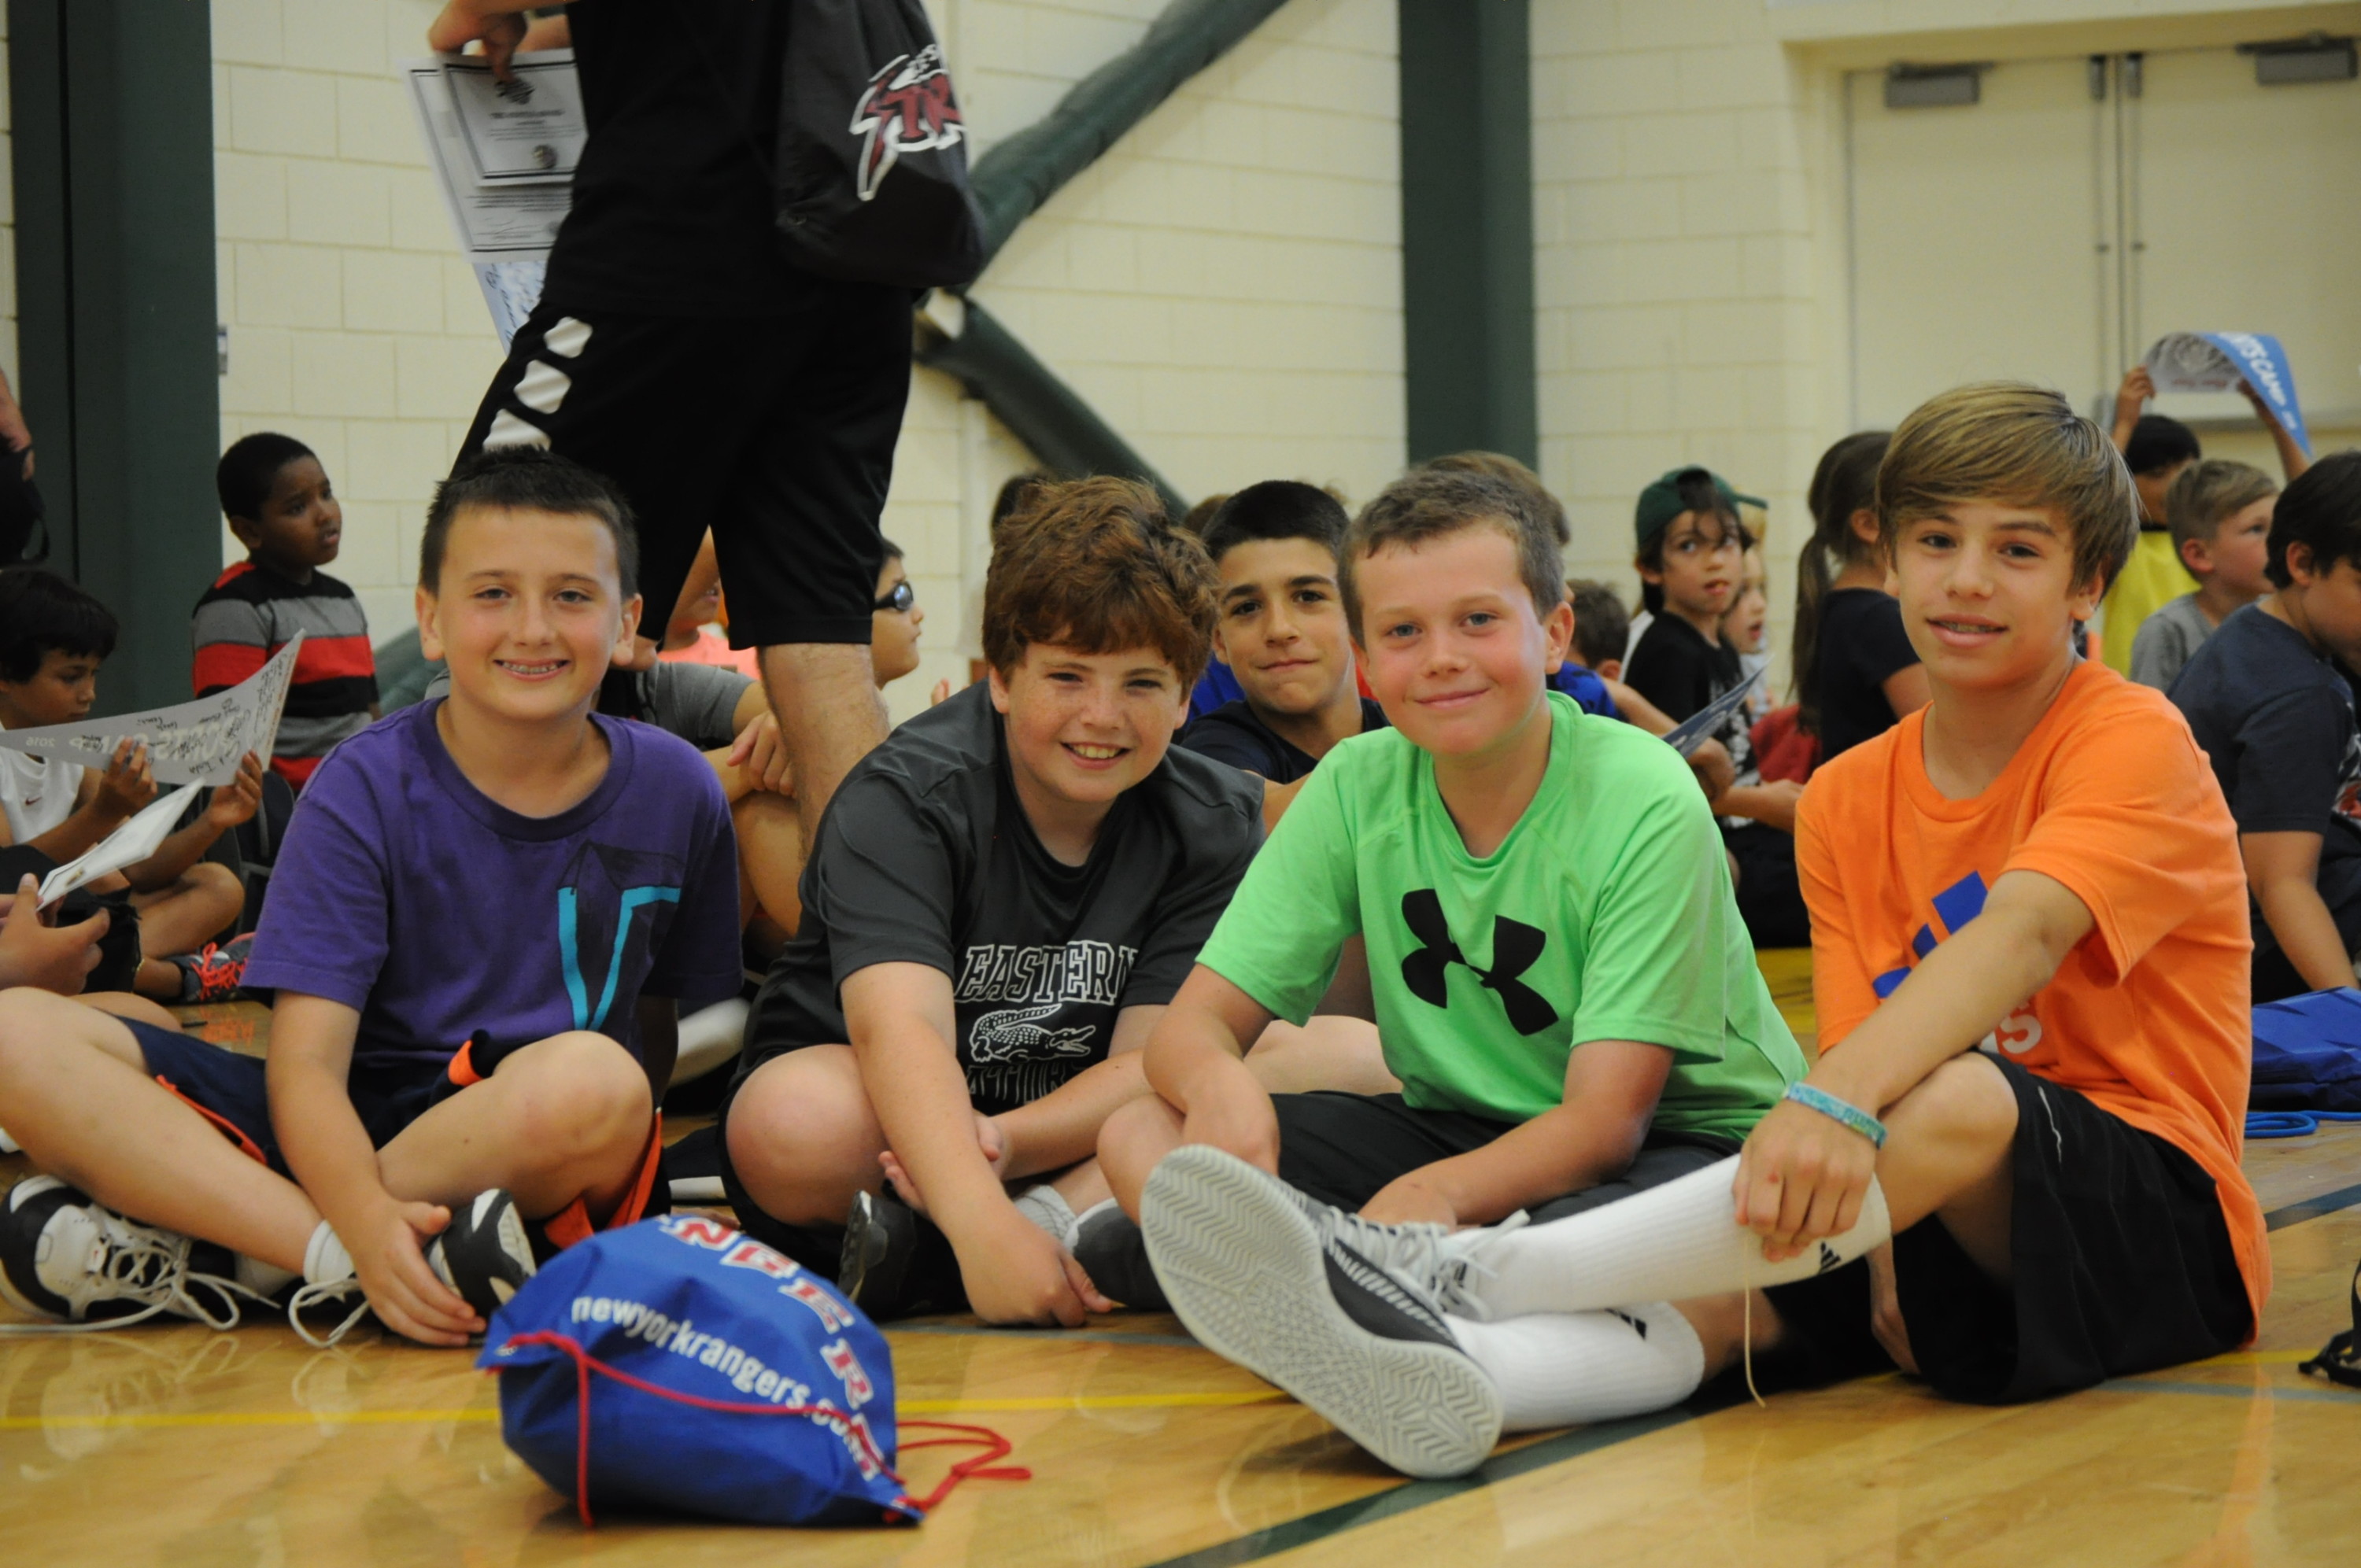 Sports Camp Awards Ceremony - ESF Summer Camps | Greenwich Catholic